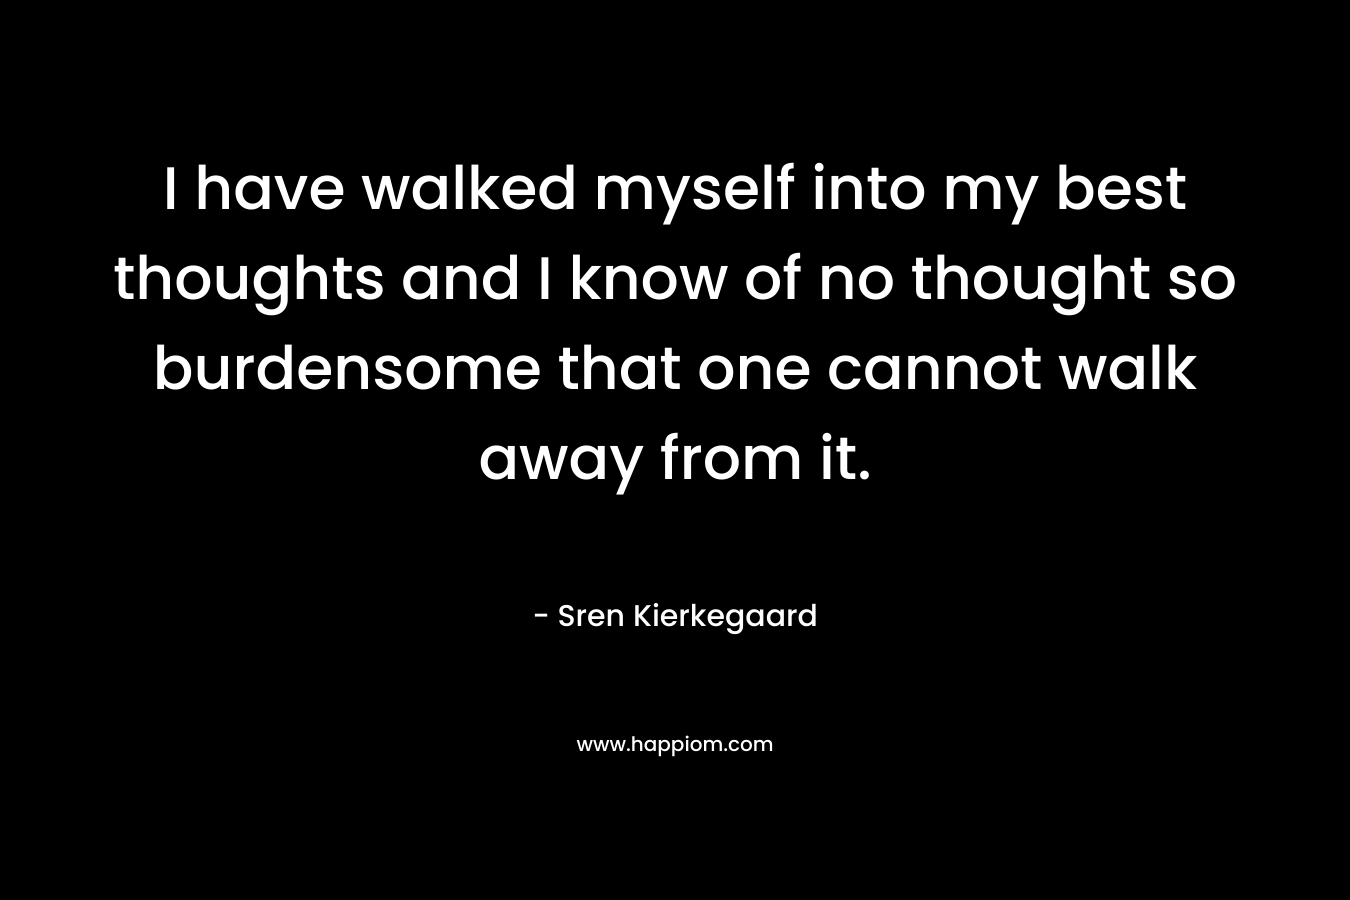 I have walked myself into my best thoughts and I know of no thought so burdensome that one cannot walk away from it.